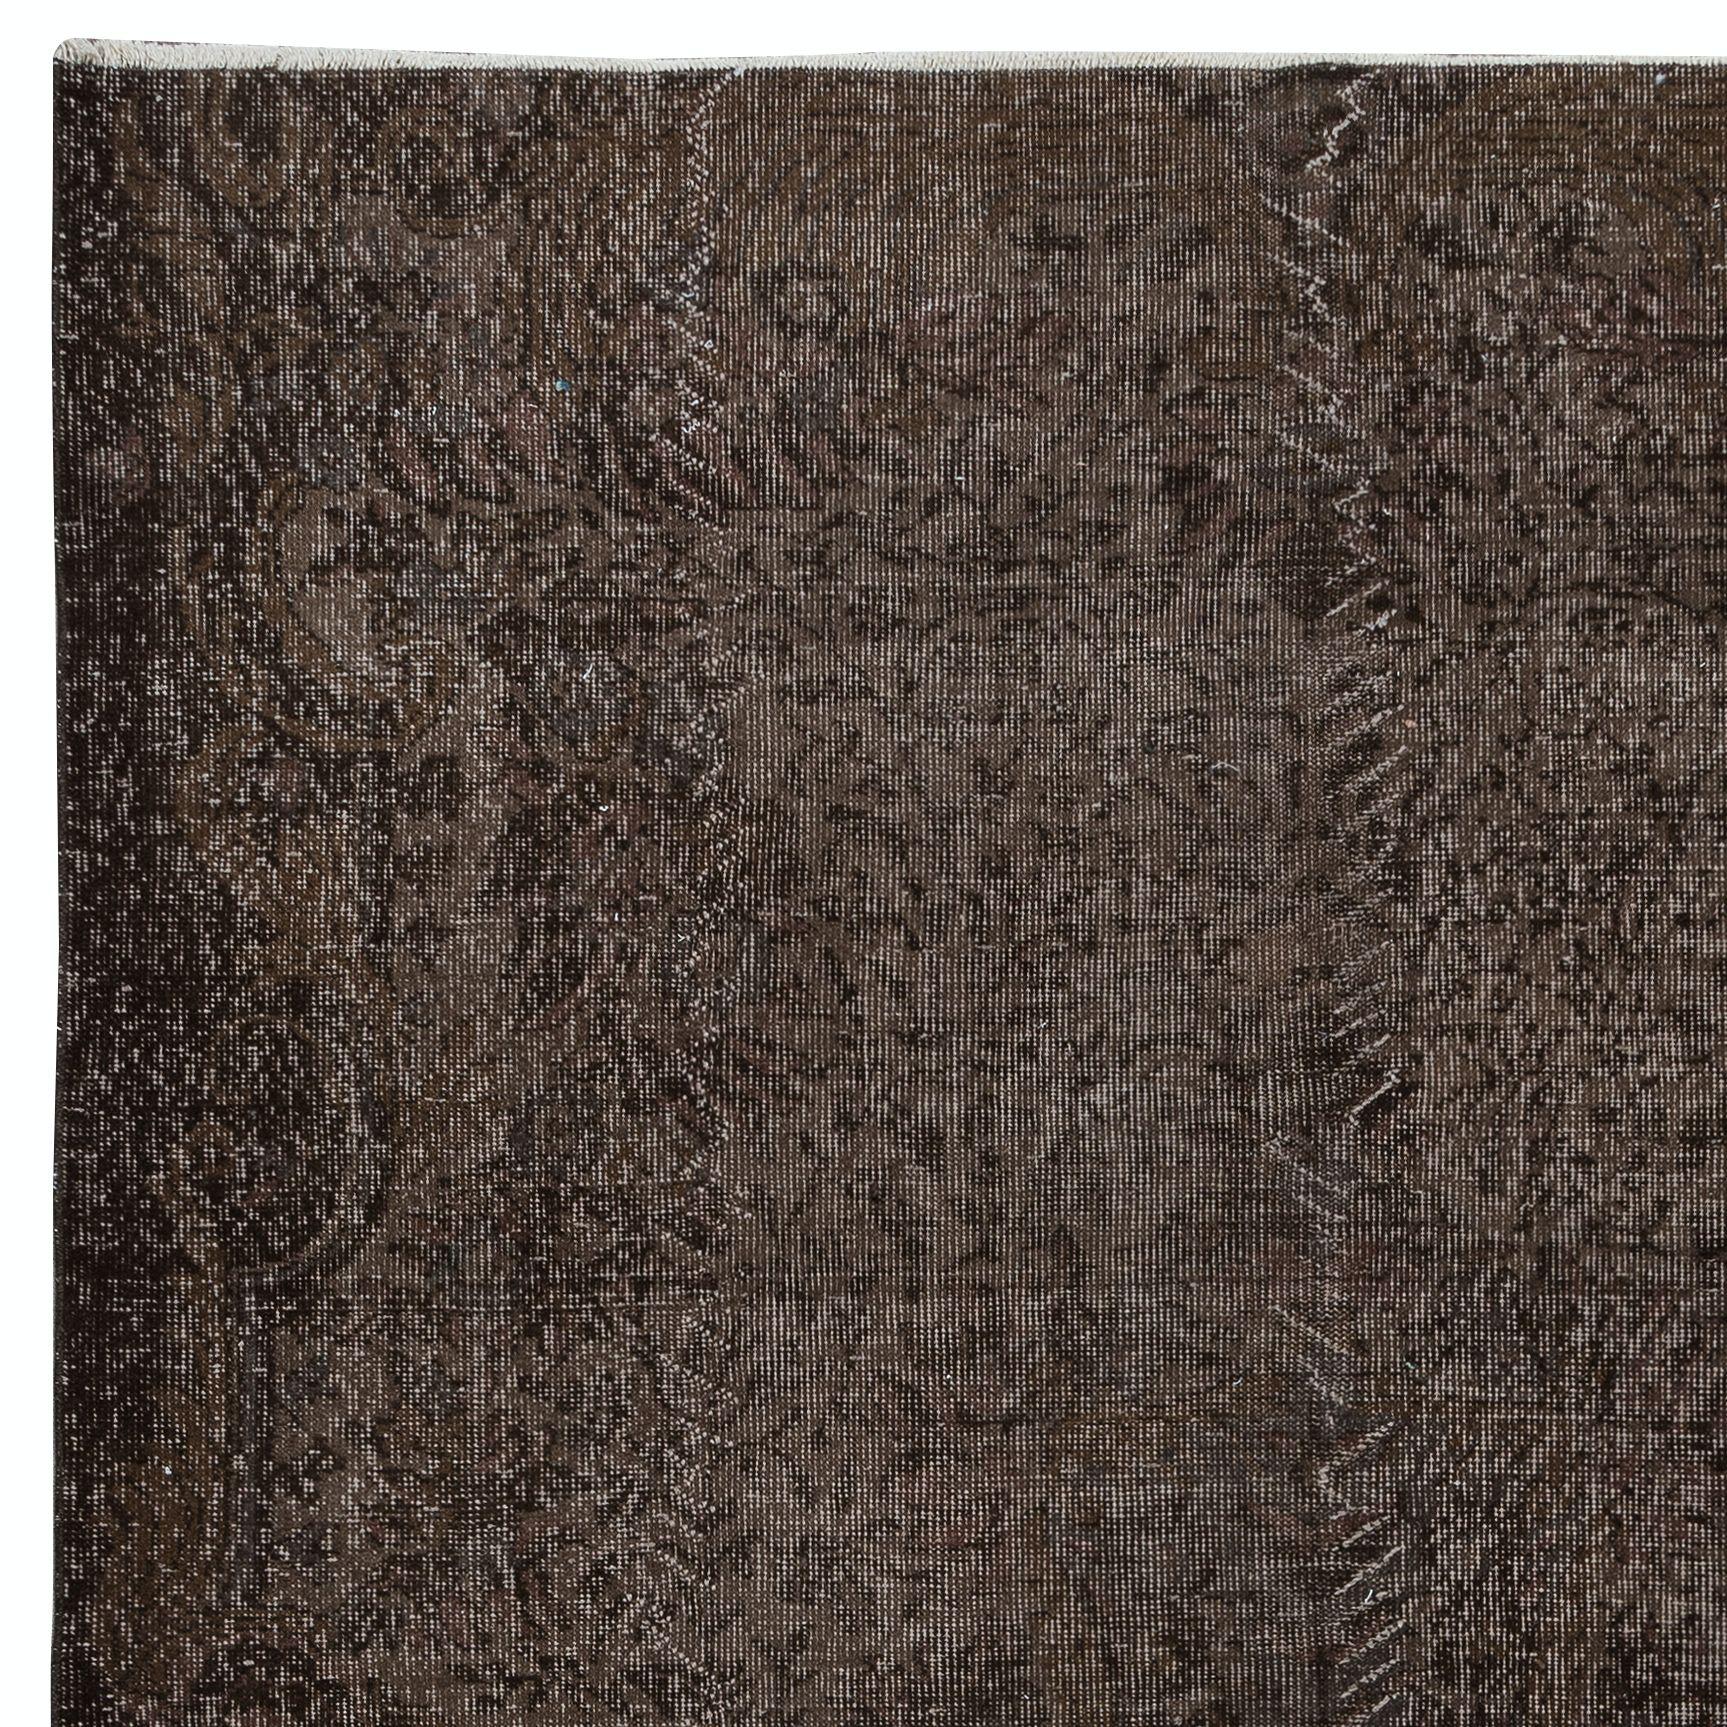 Turkish 6x8.4 Ft Brown Solid Modern Area Rug for Modern Interiors, Handknotted in Turkey For Sale